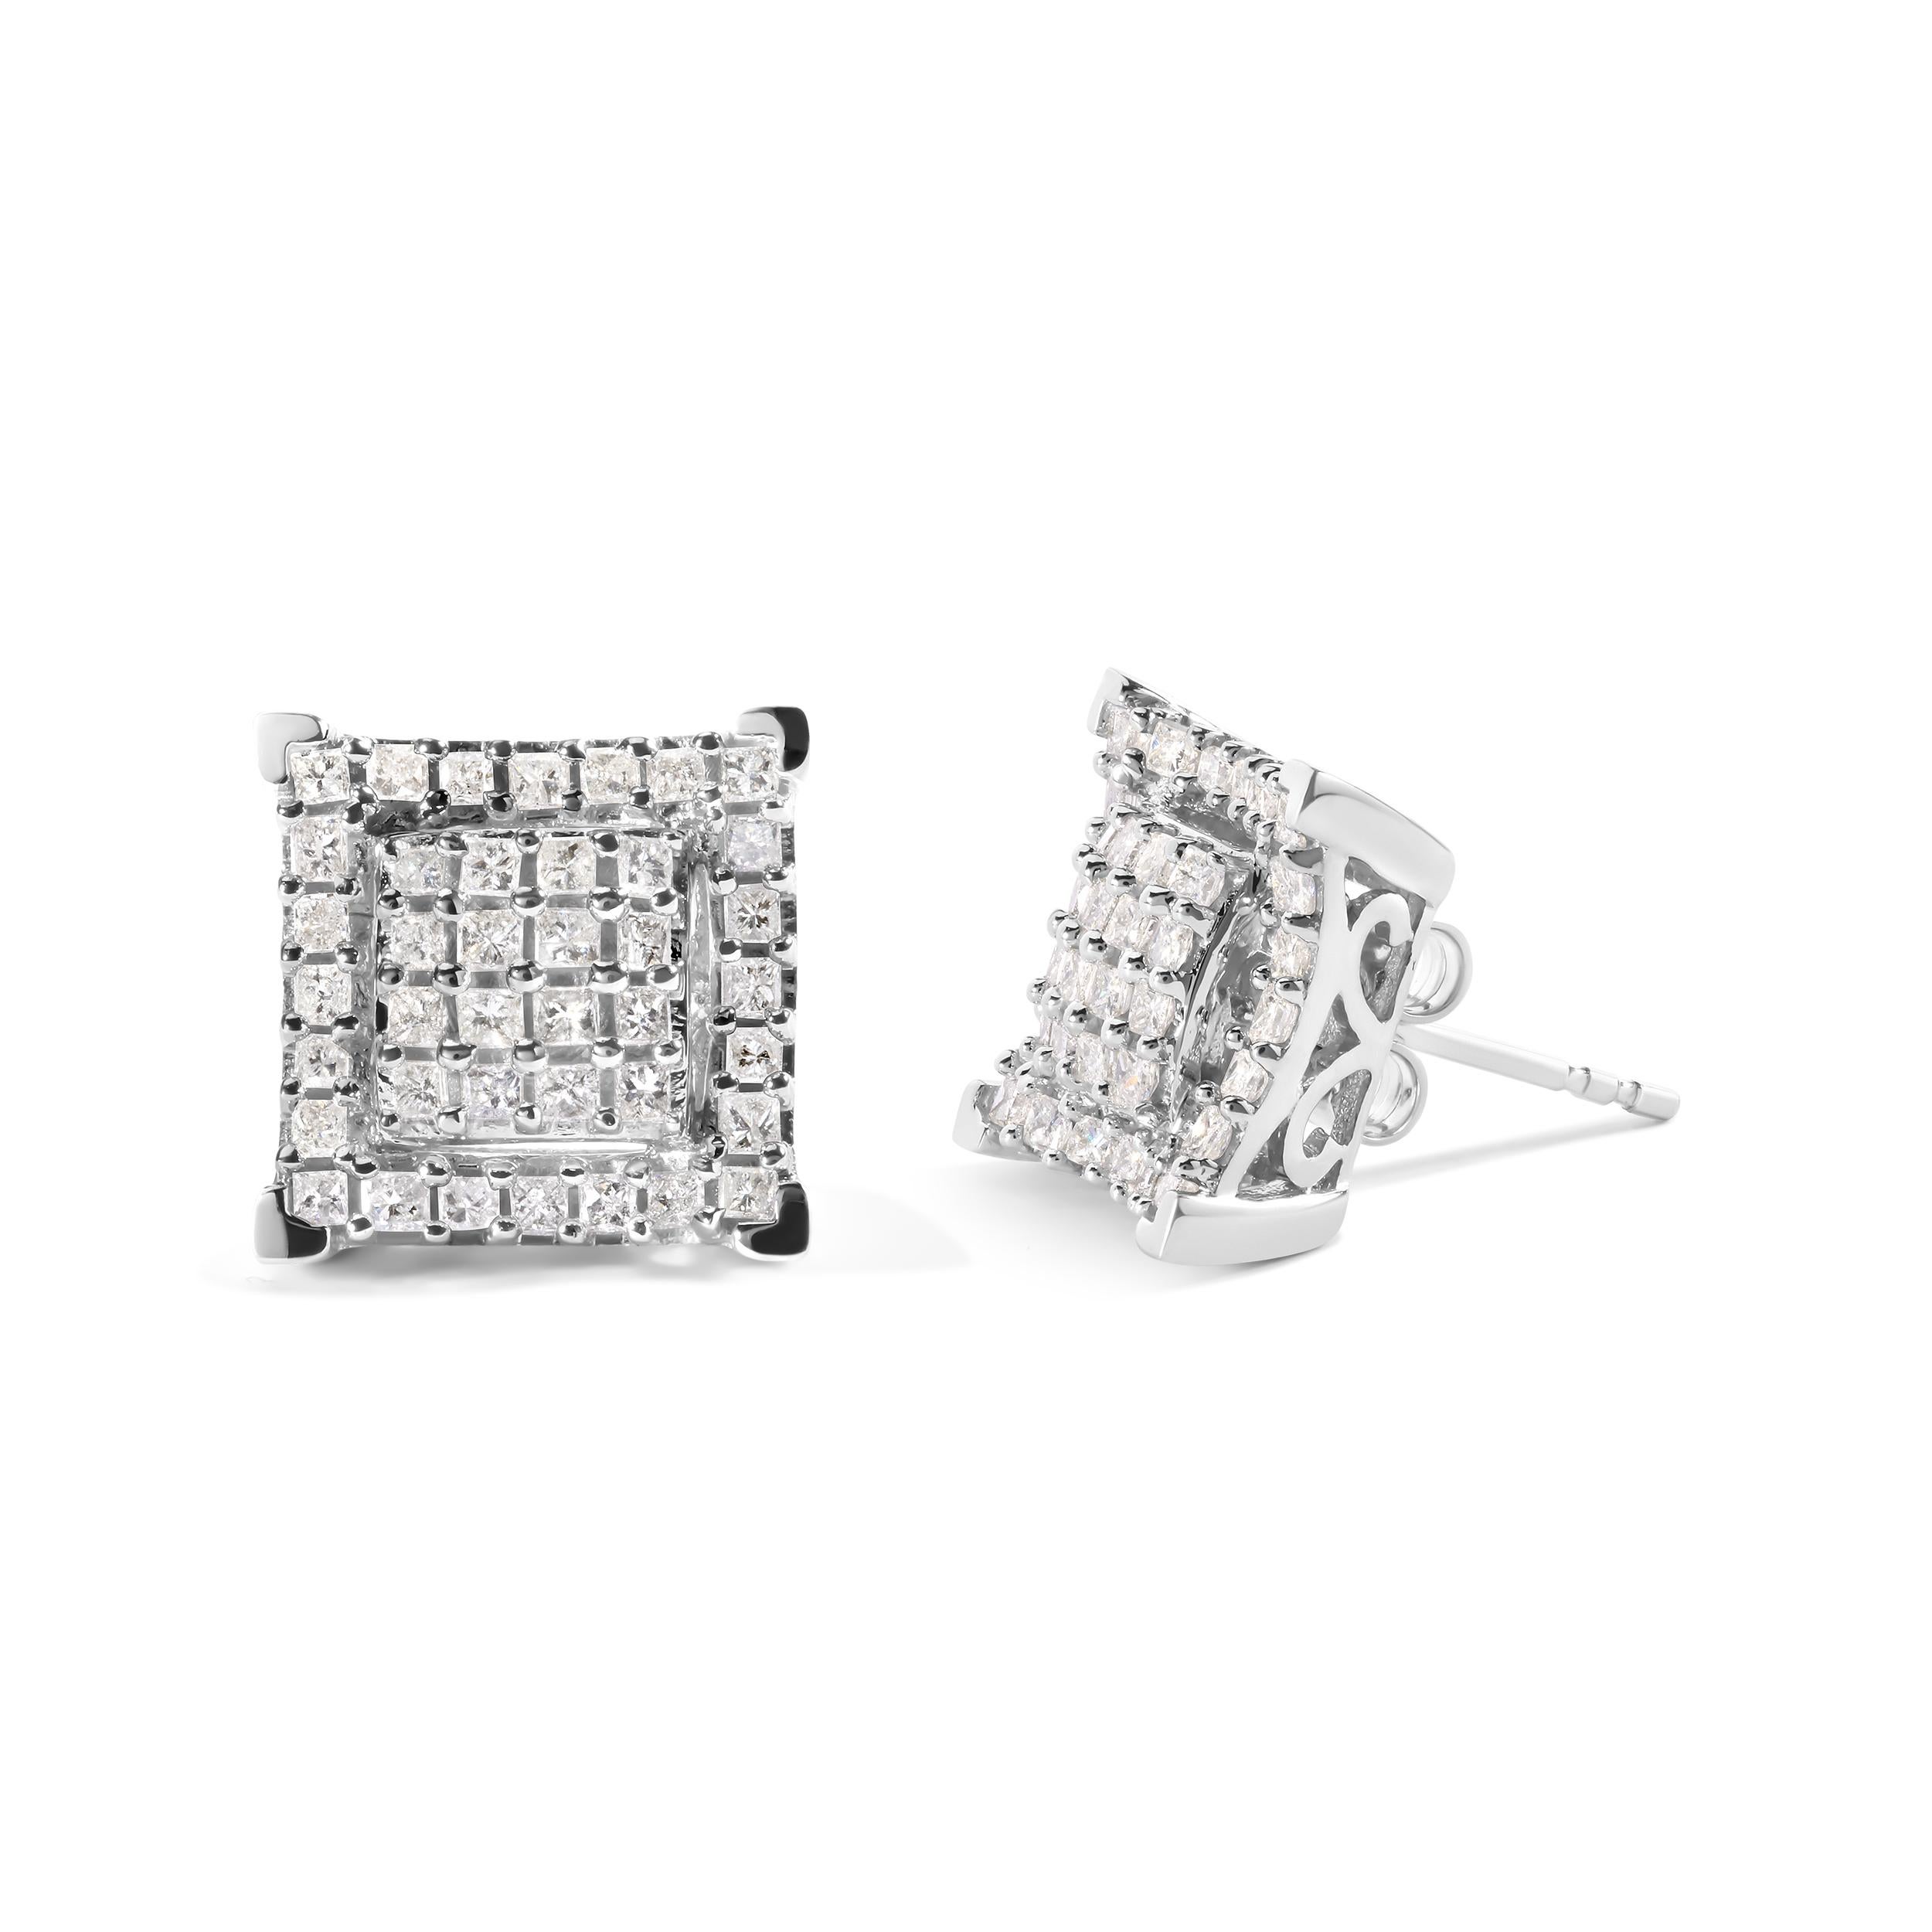 Indulge in the exquisite beauty of these 10K White Gold Princess Diamond Composite Double Square and Halo Stud Earrings. With a total weight of 1 1/4 cttw and 80 dazzling diamonds, these earrings will make a statement wherever you go. The diamond